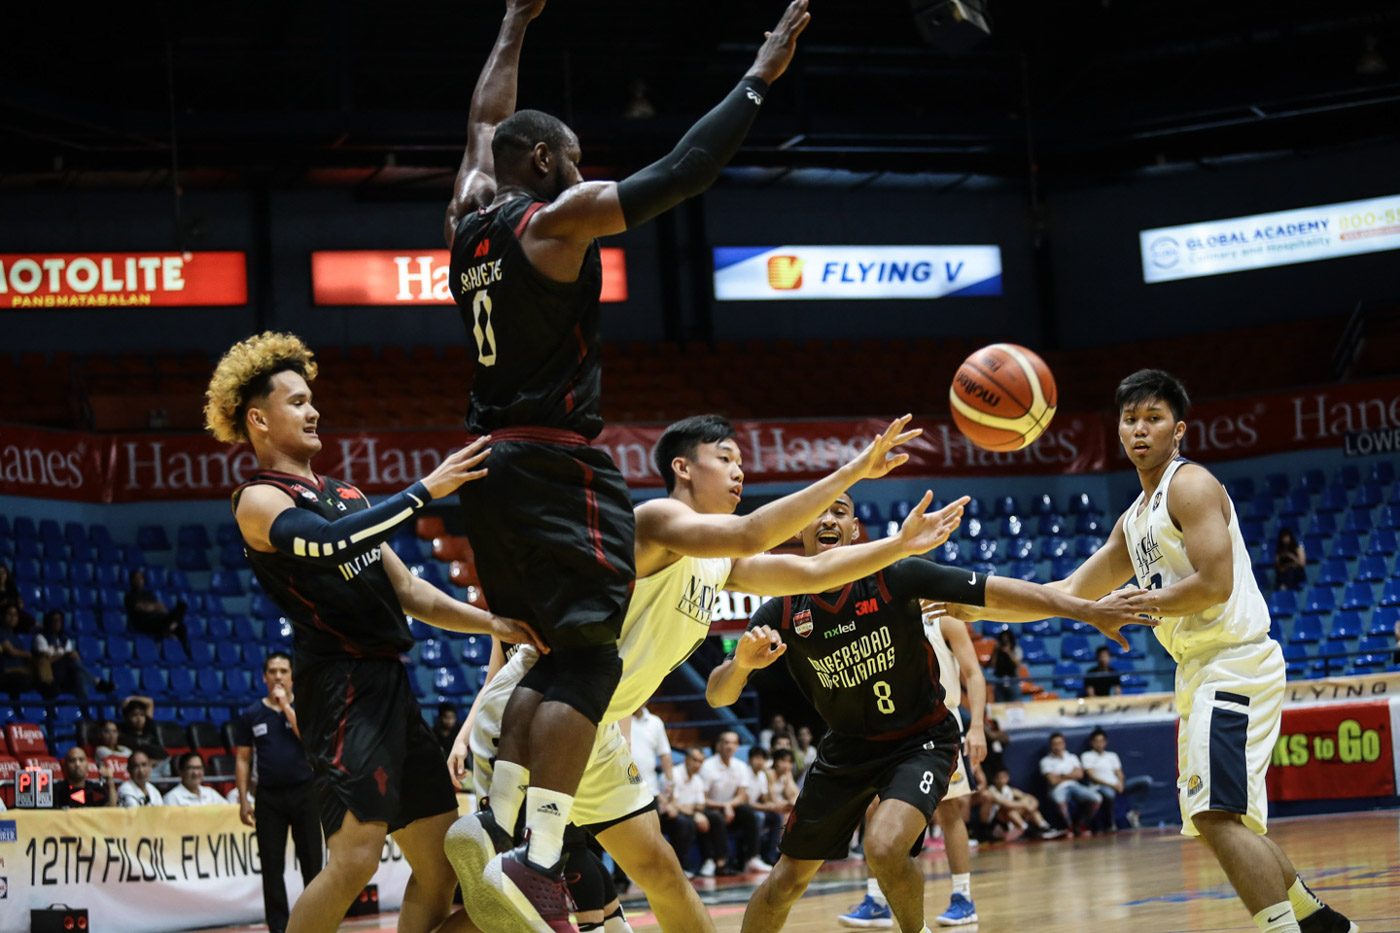 UP nails first FilOil win over NU, La Salle rallies past Perpetual